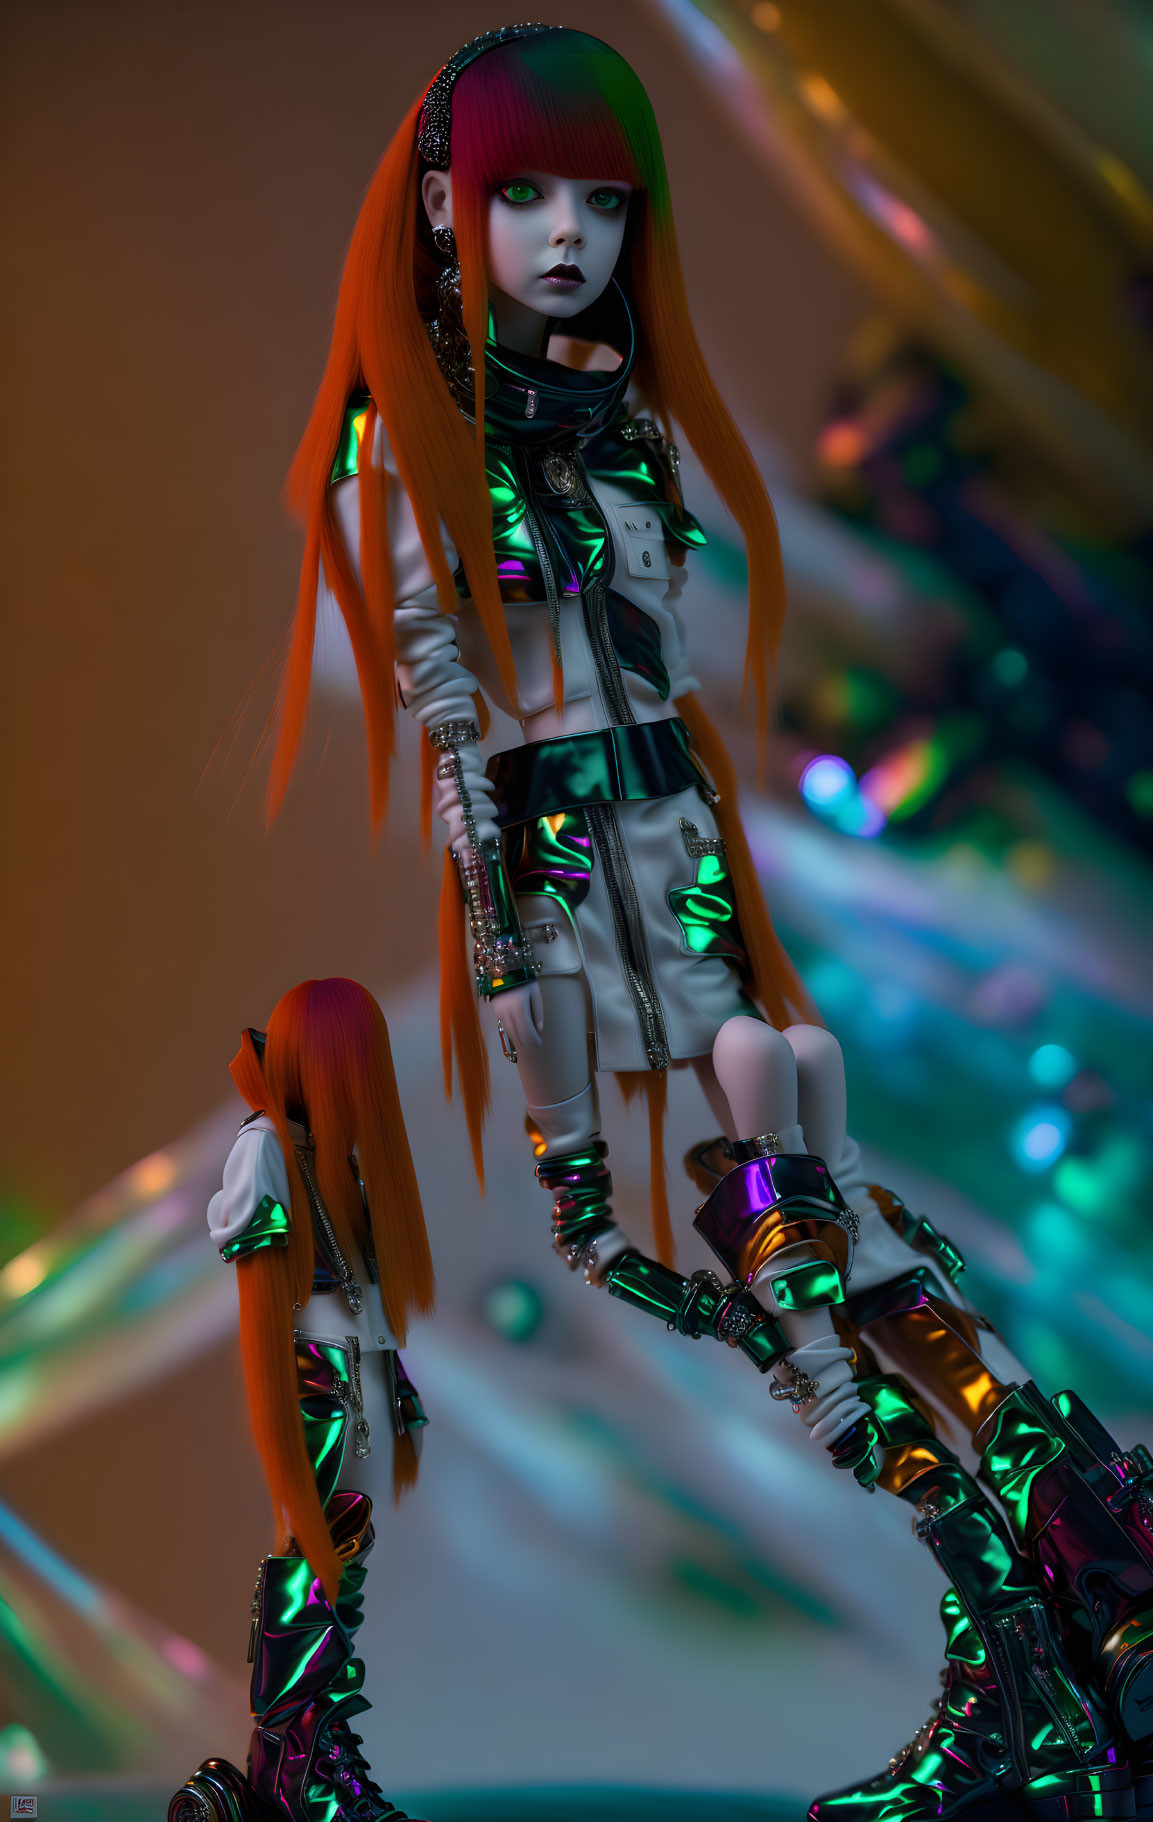 Futuristic 3D-rendered female character with red hair and cybernetic enhancements